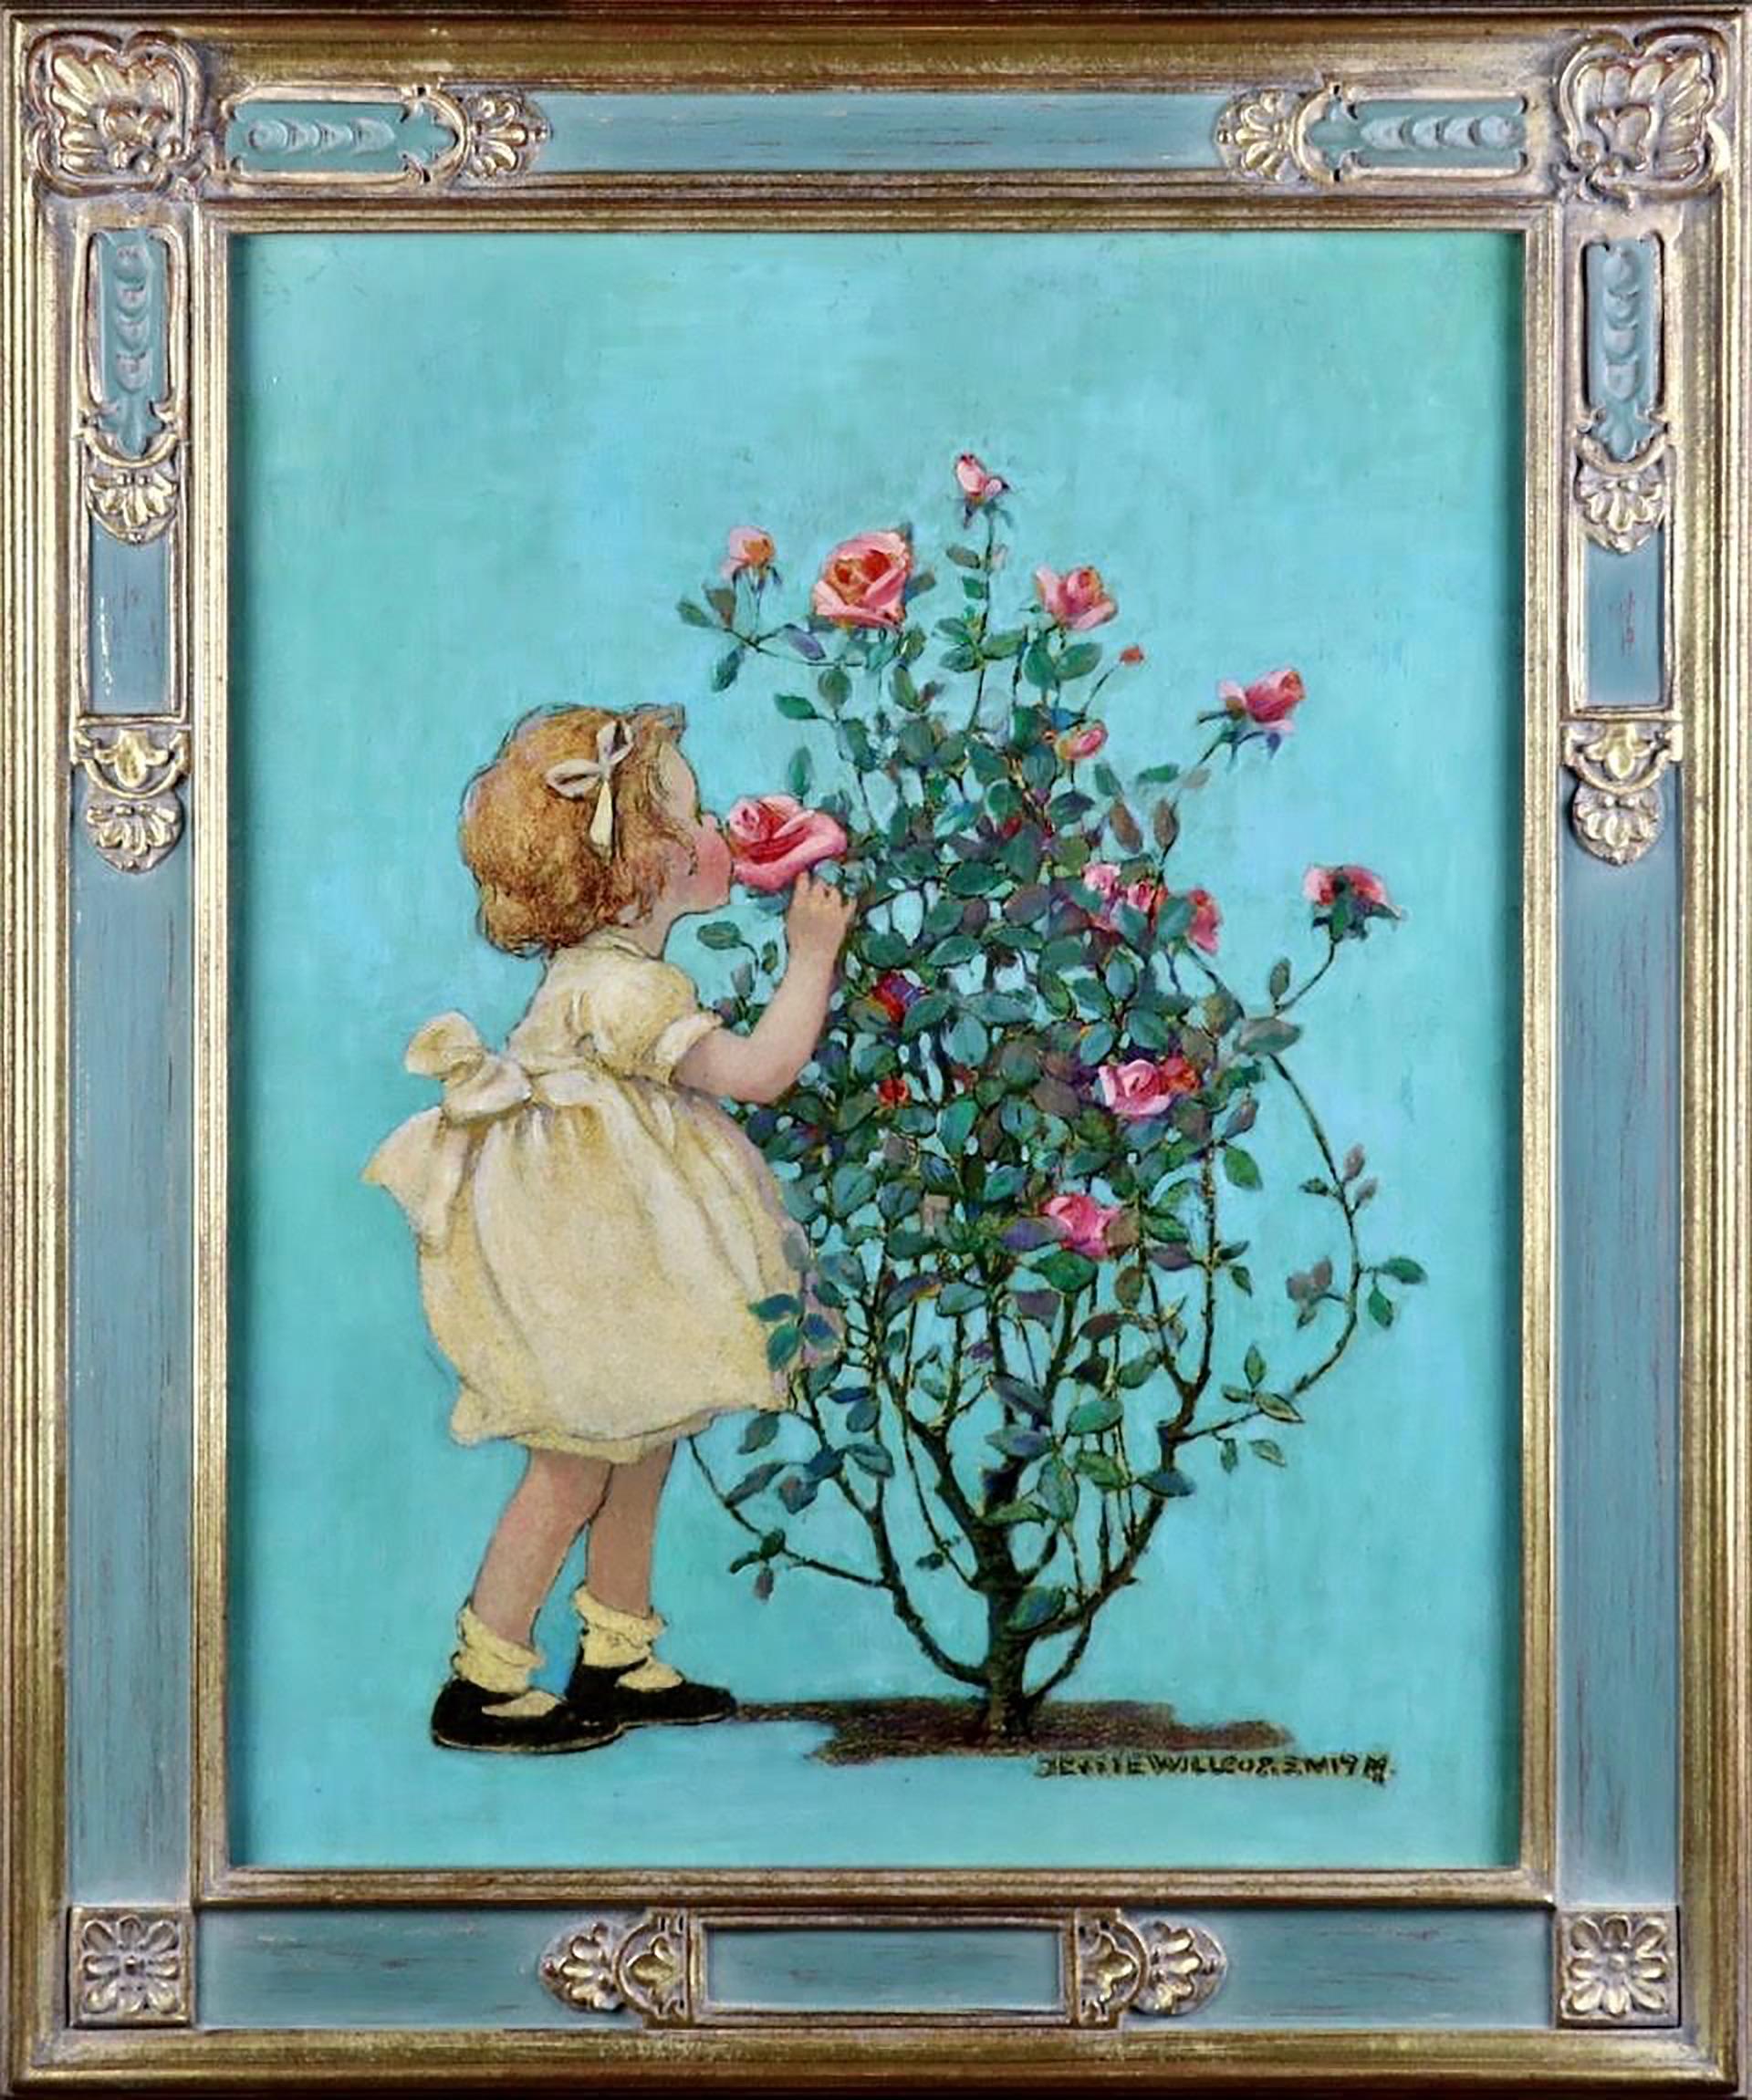 A Rose by Any Other Name - Art by Jessie Willcox Smith